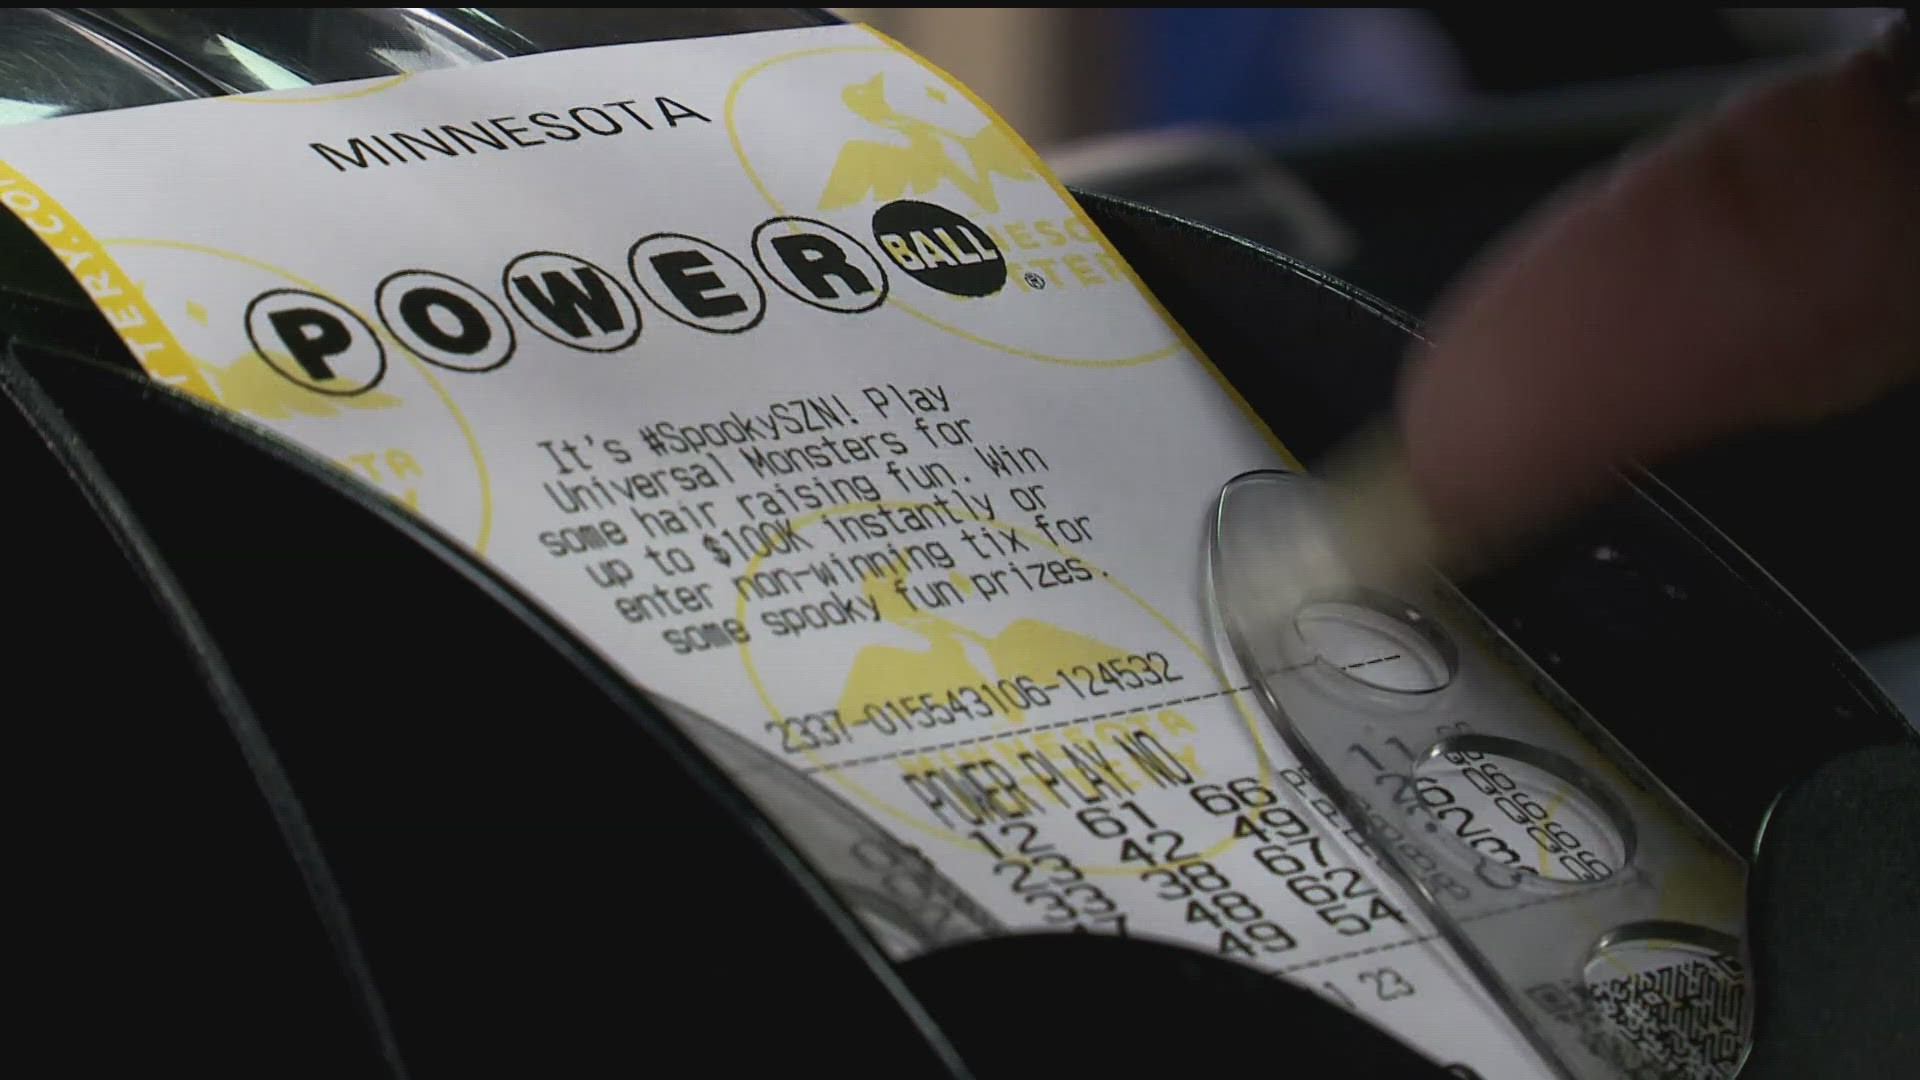 Wednesday's drawing was the second-highest jackpot in Powerball history.